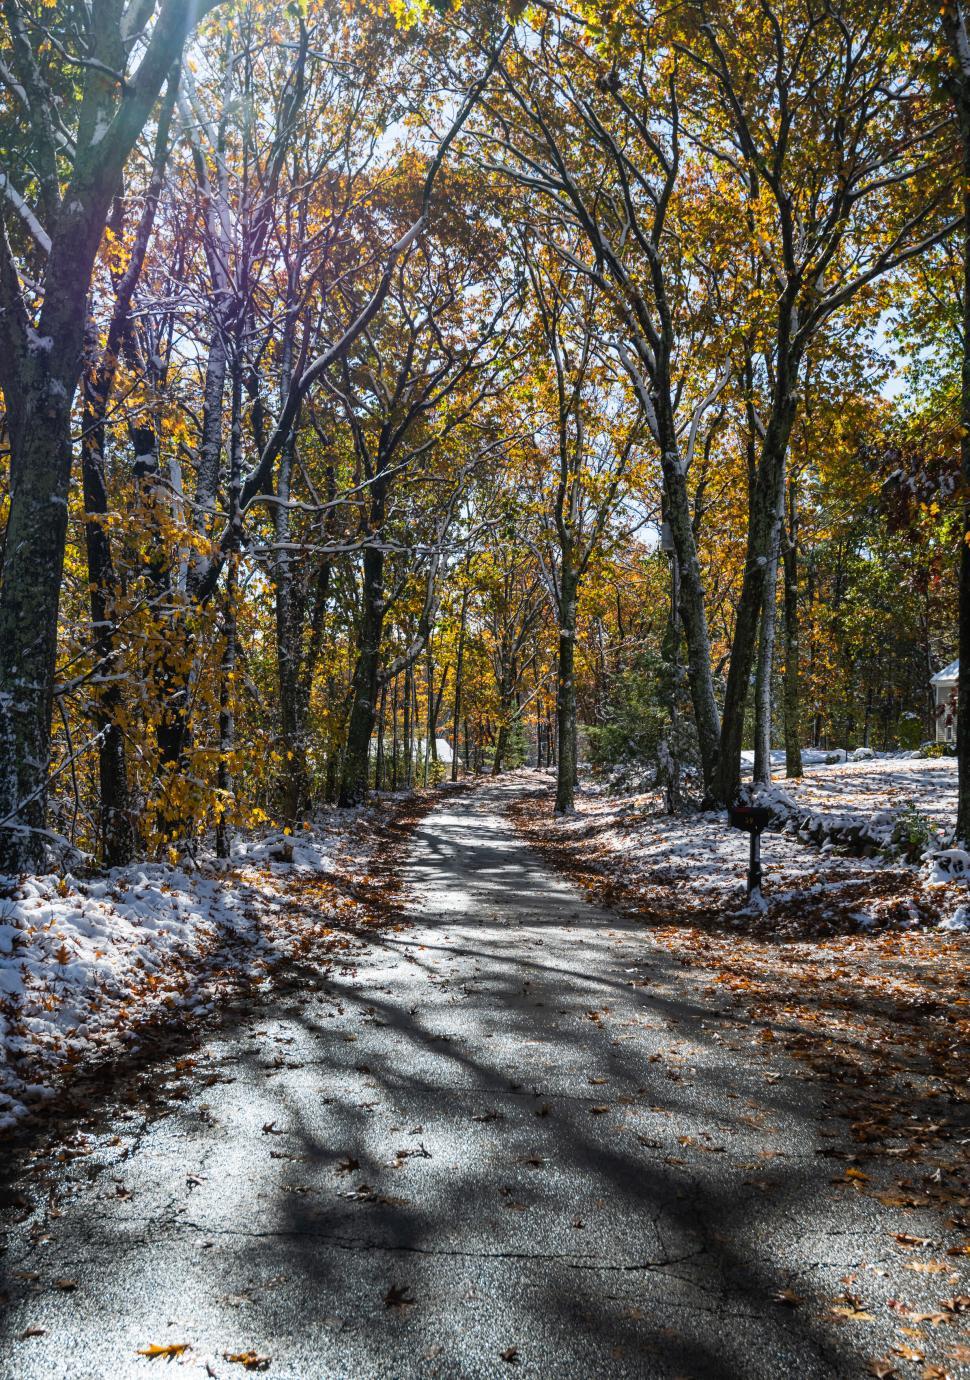 Free Image of Sunlit Forest Road with Autumn Leaves 